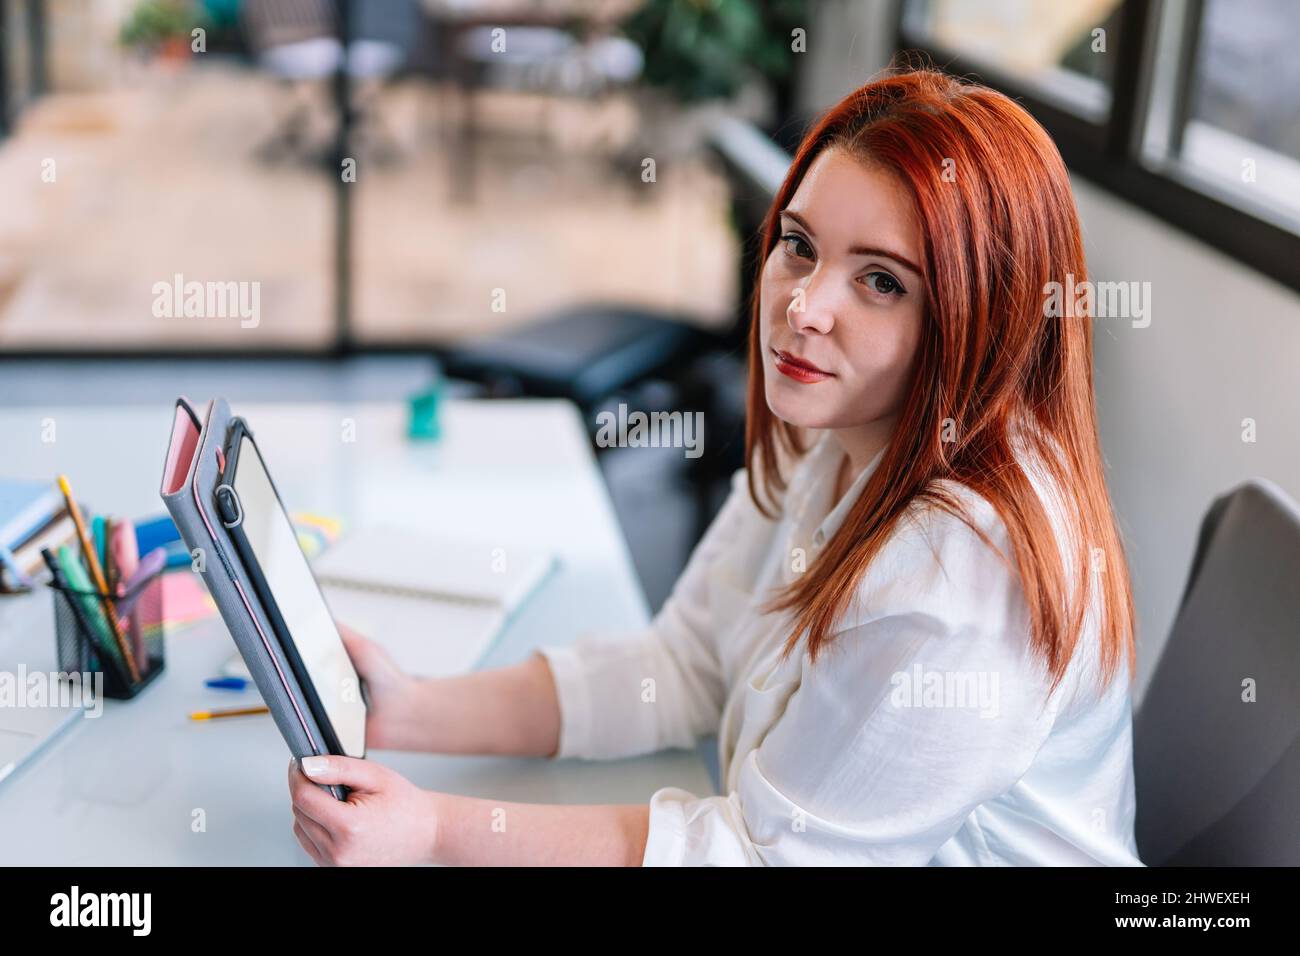 Young woman looking at camera while using tablet at work Stock Photo